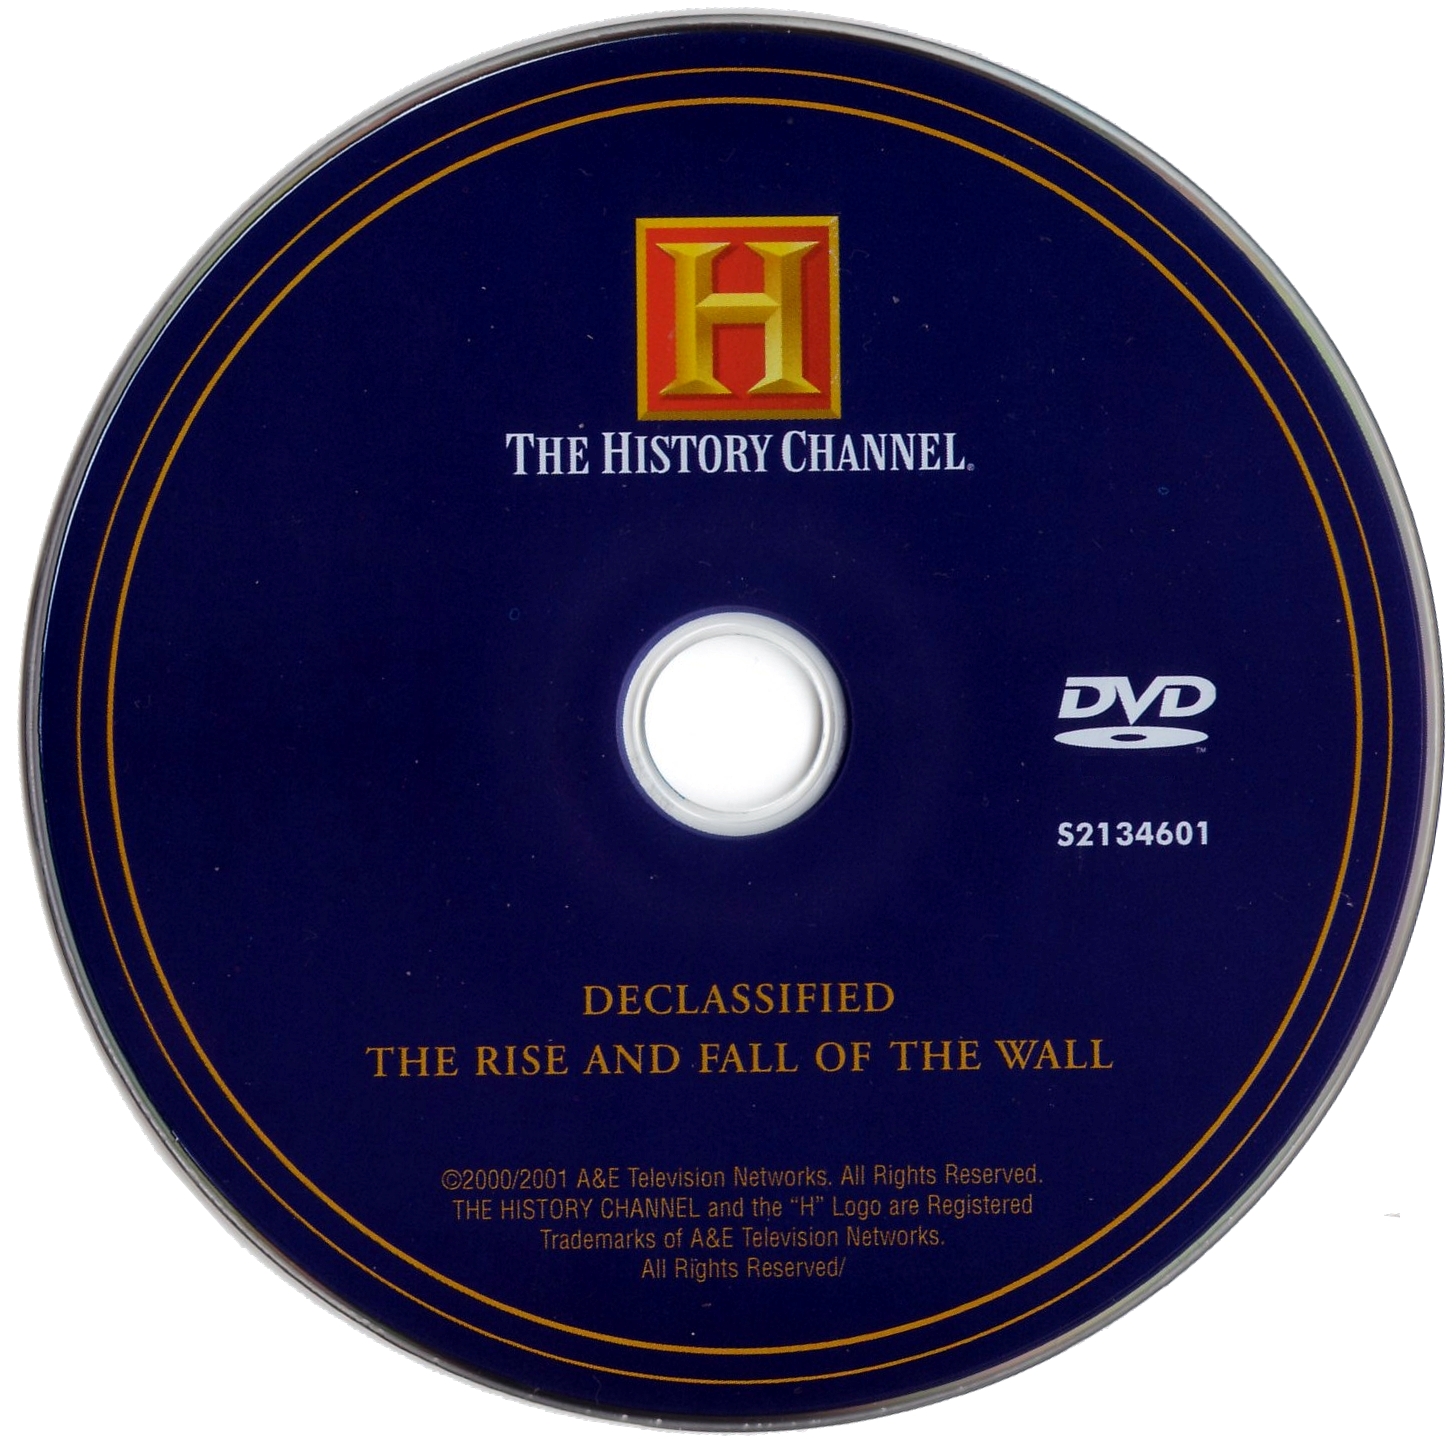 The History Channel - Declassified - The rise and fall of the wall